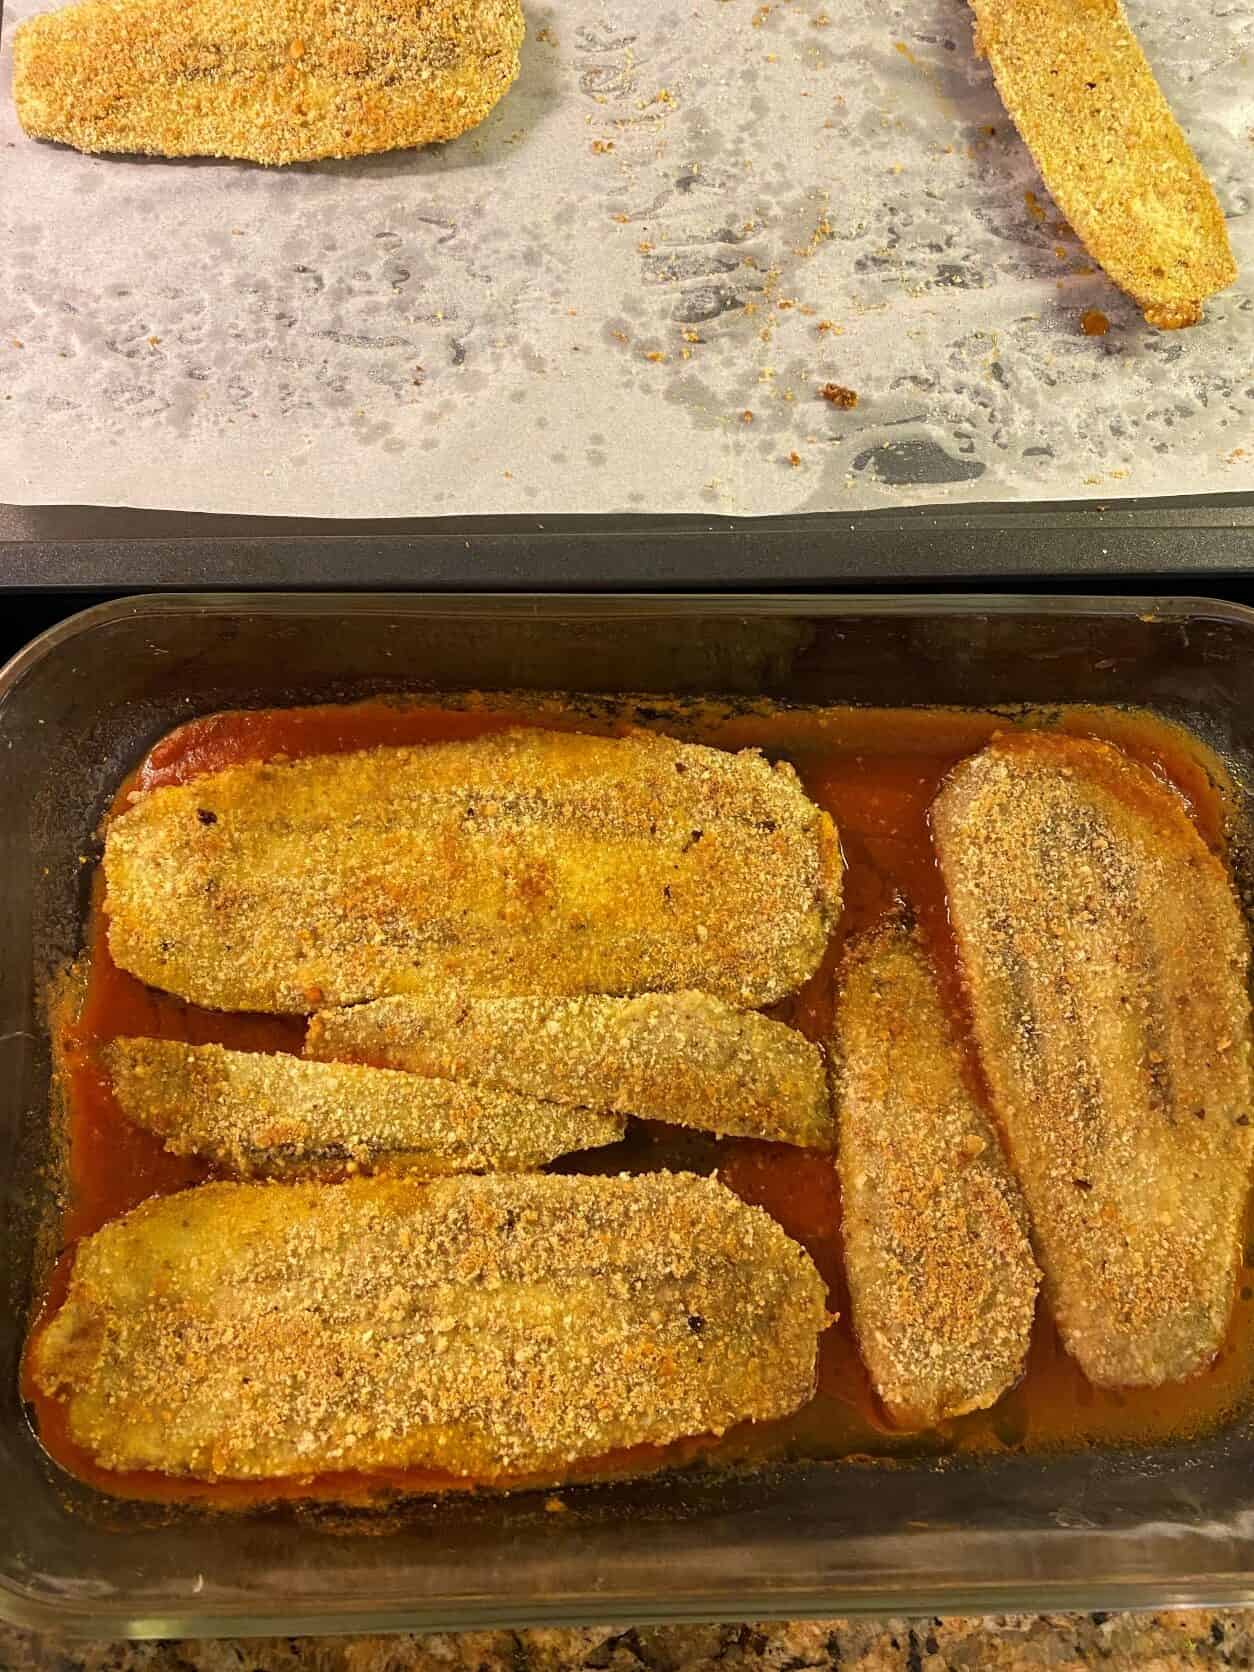 Layered Eggplant slices in a baking dish